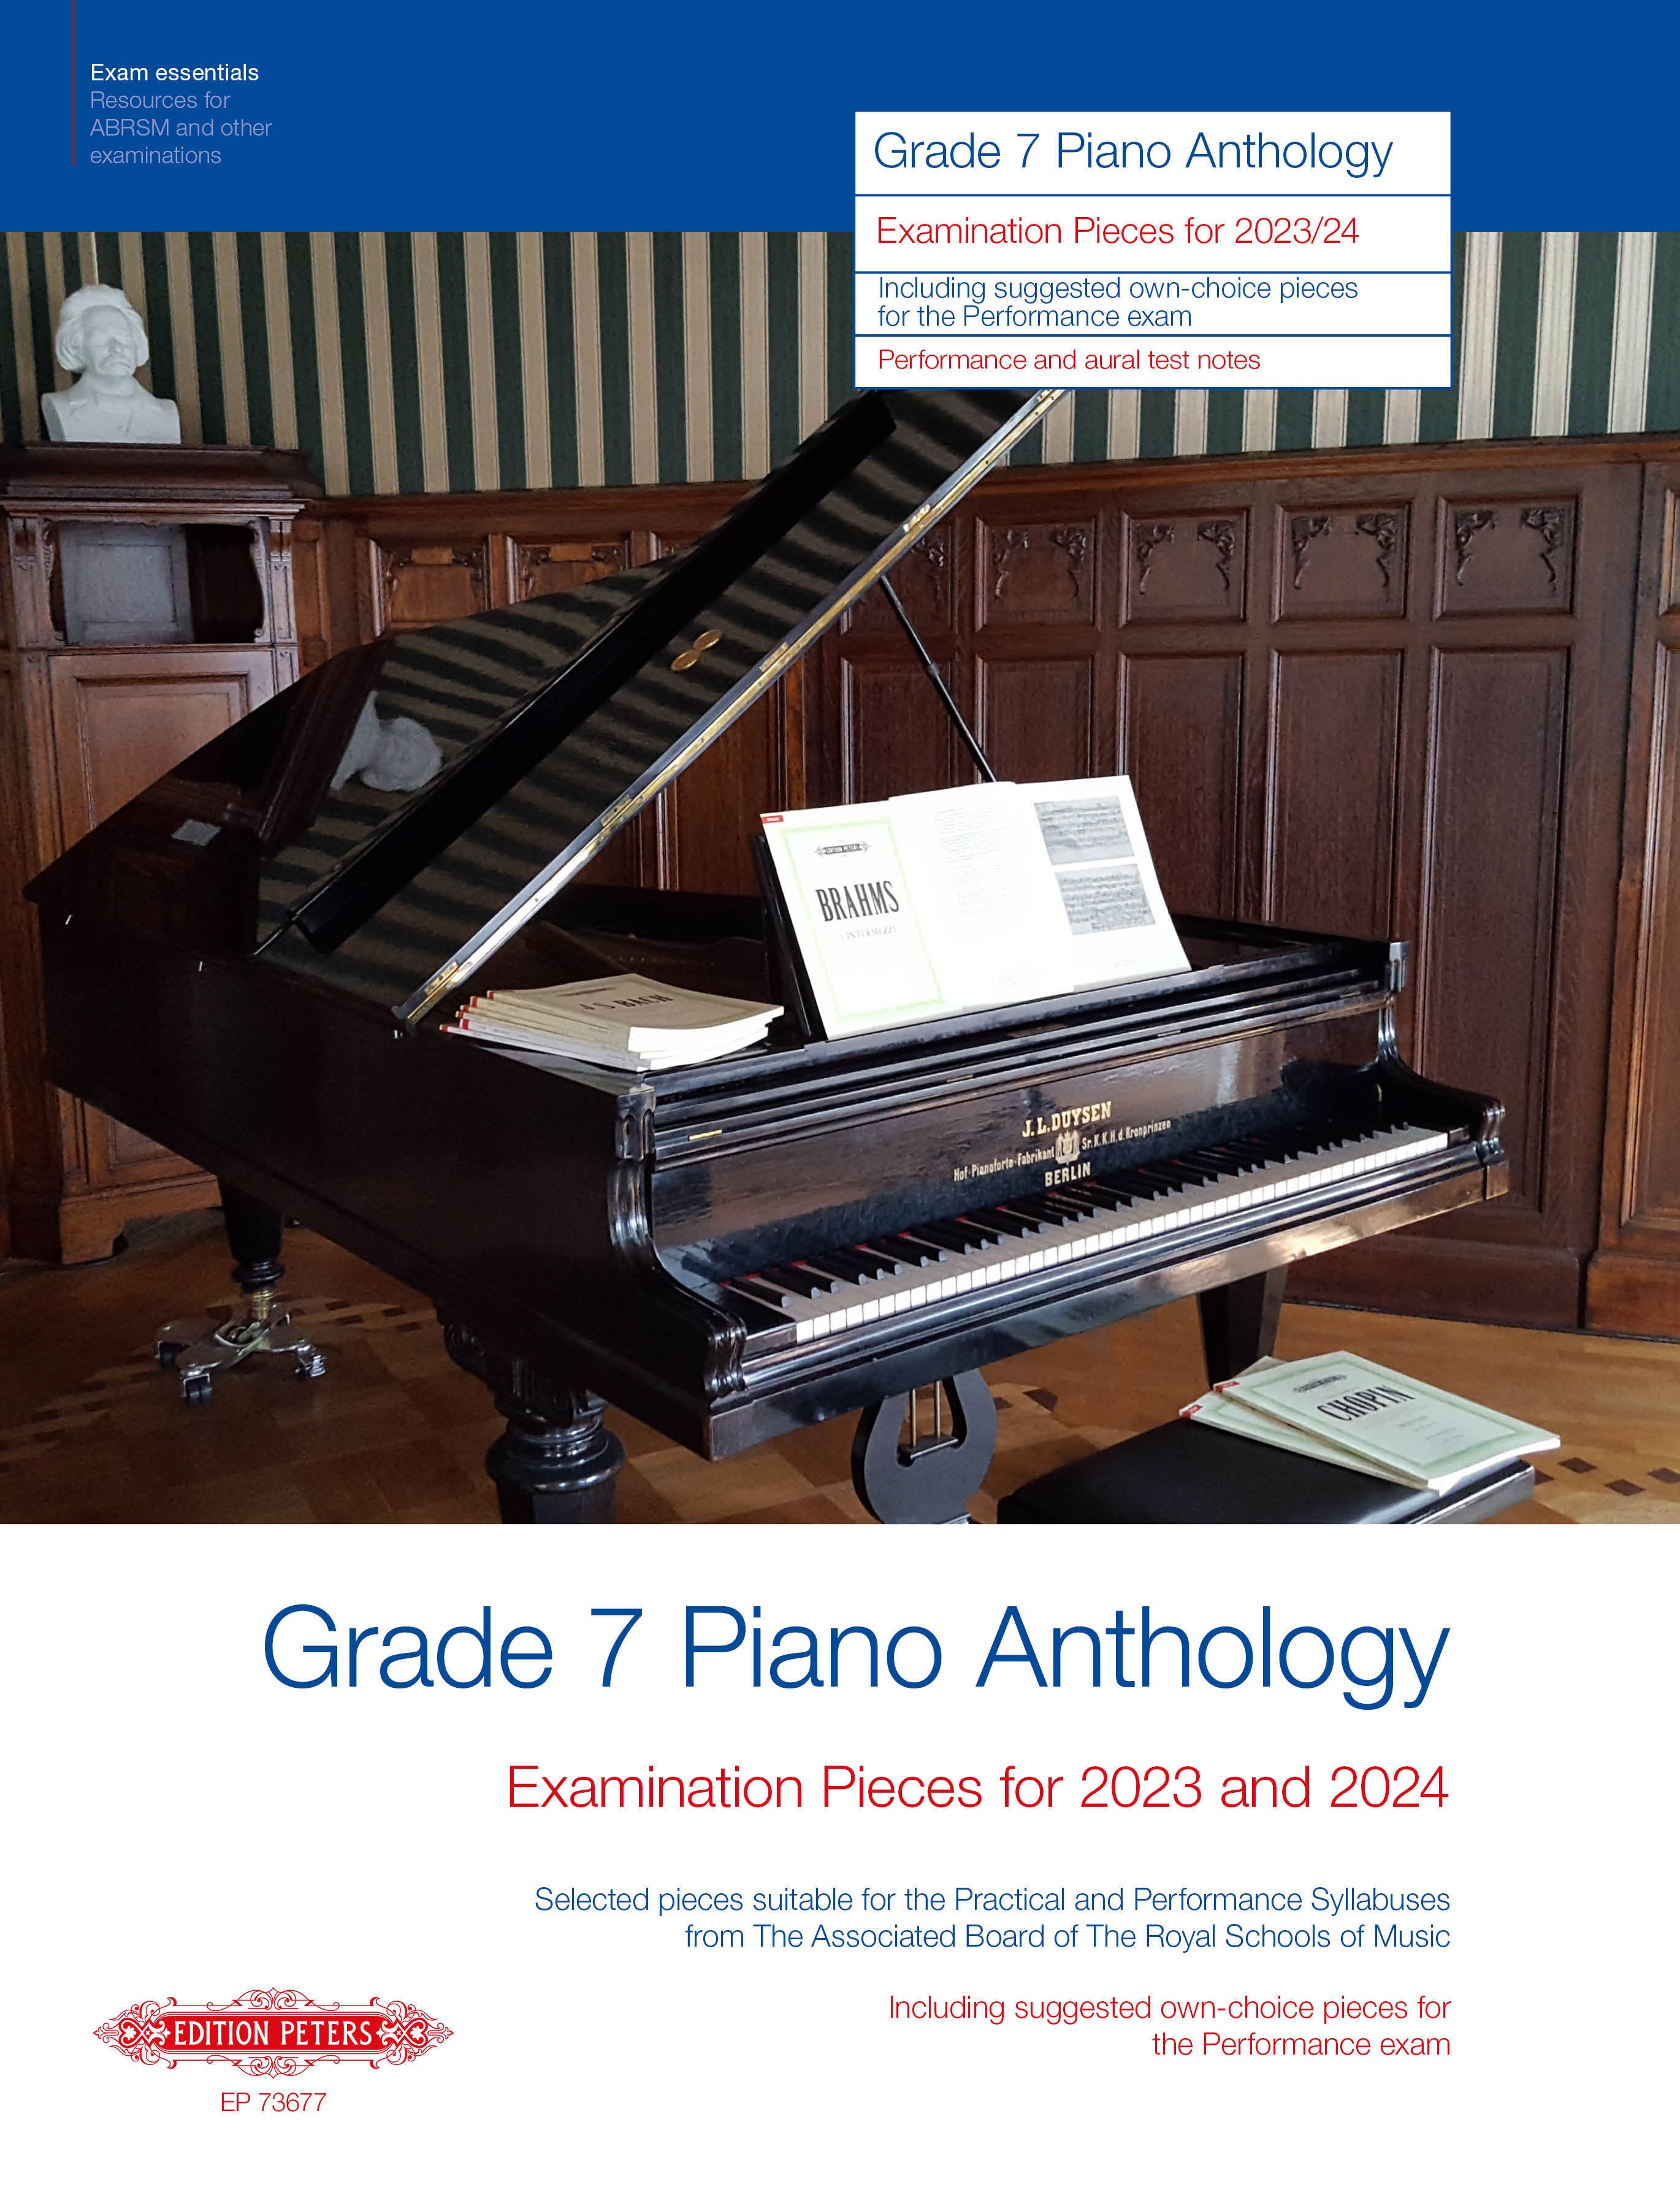 Grade 7 Piano Anthology: Examination Pieces for 2023 and 2024